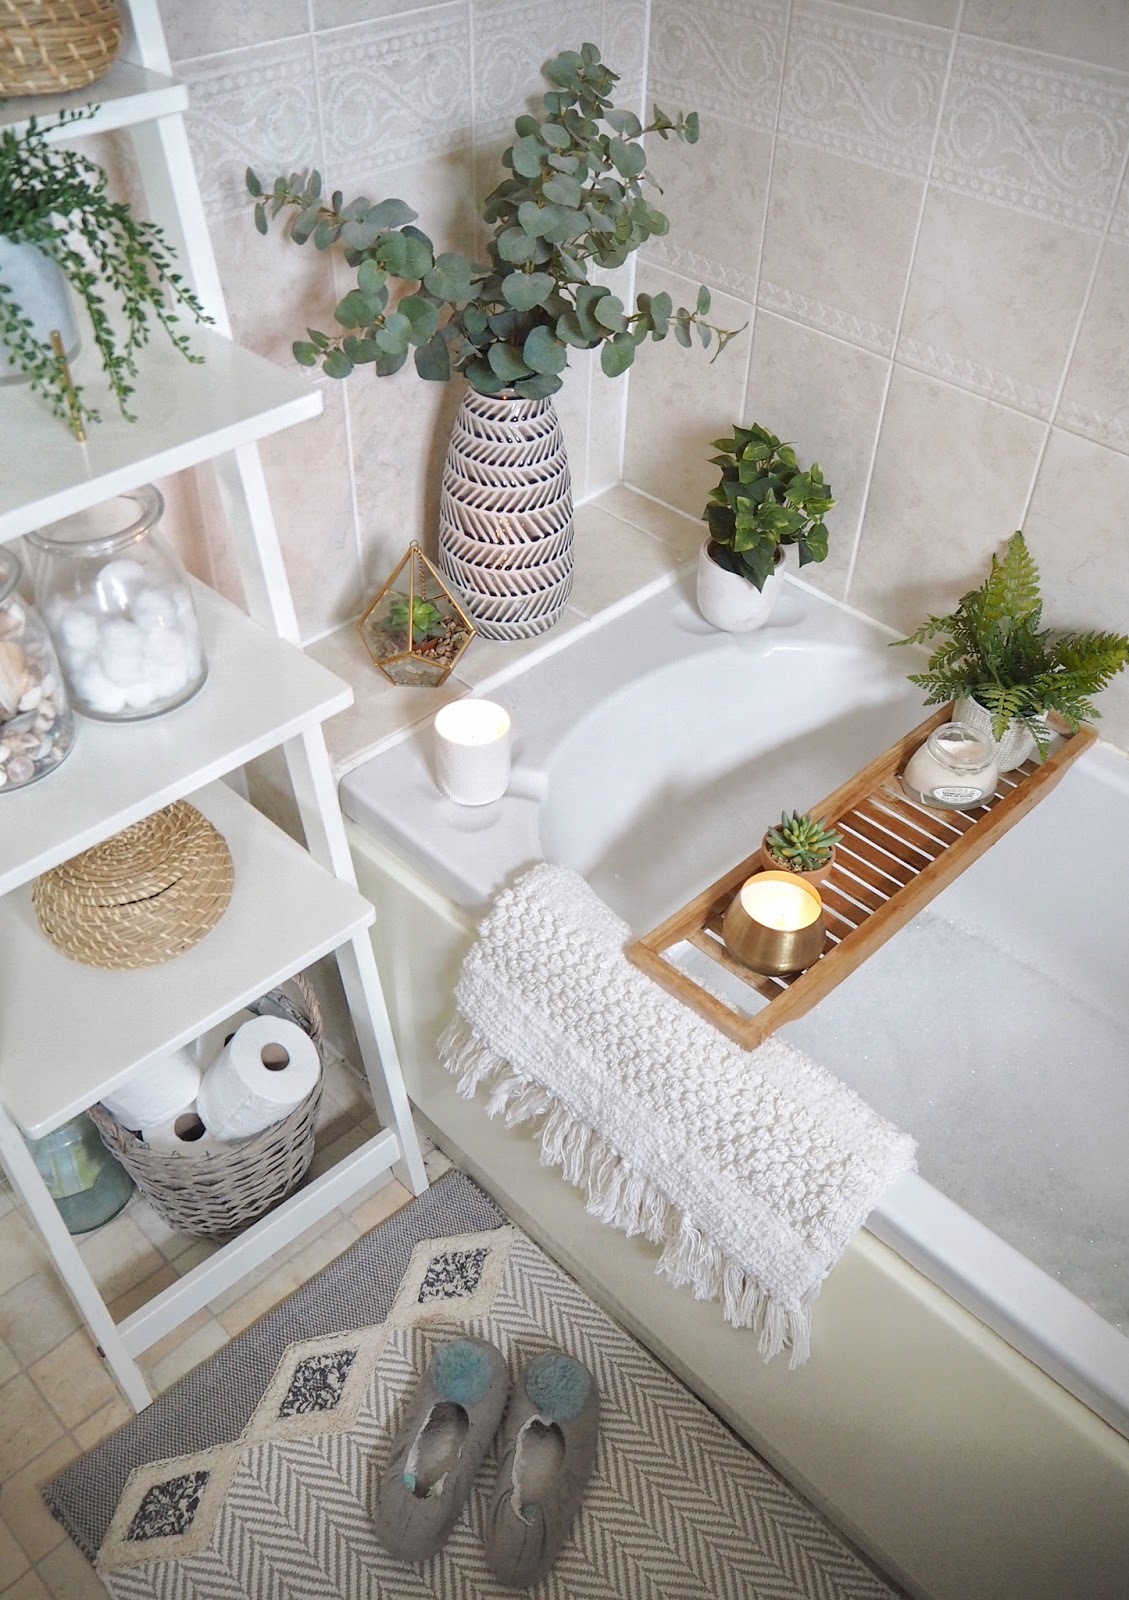 How to give your small bathroom a quick, simple and budget-friendly makeover, using accessories only. Featuring tips on how to maximise space, trick the eye into making the room look bigger, incorporate storage into your interior design, and how small can still be stylish. Artificial plants and greenery add a natural touch without the commitment of live plants, and a bath shelf makes more of the space.